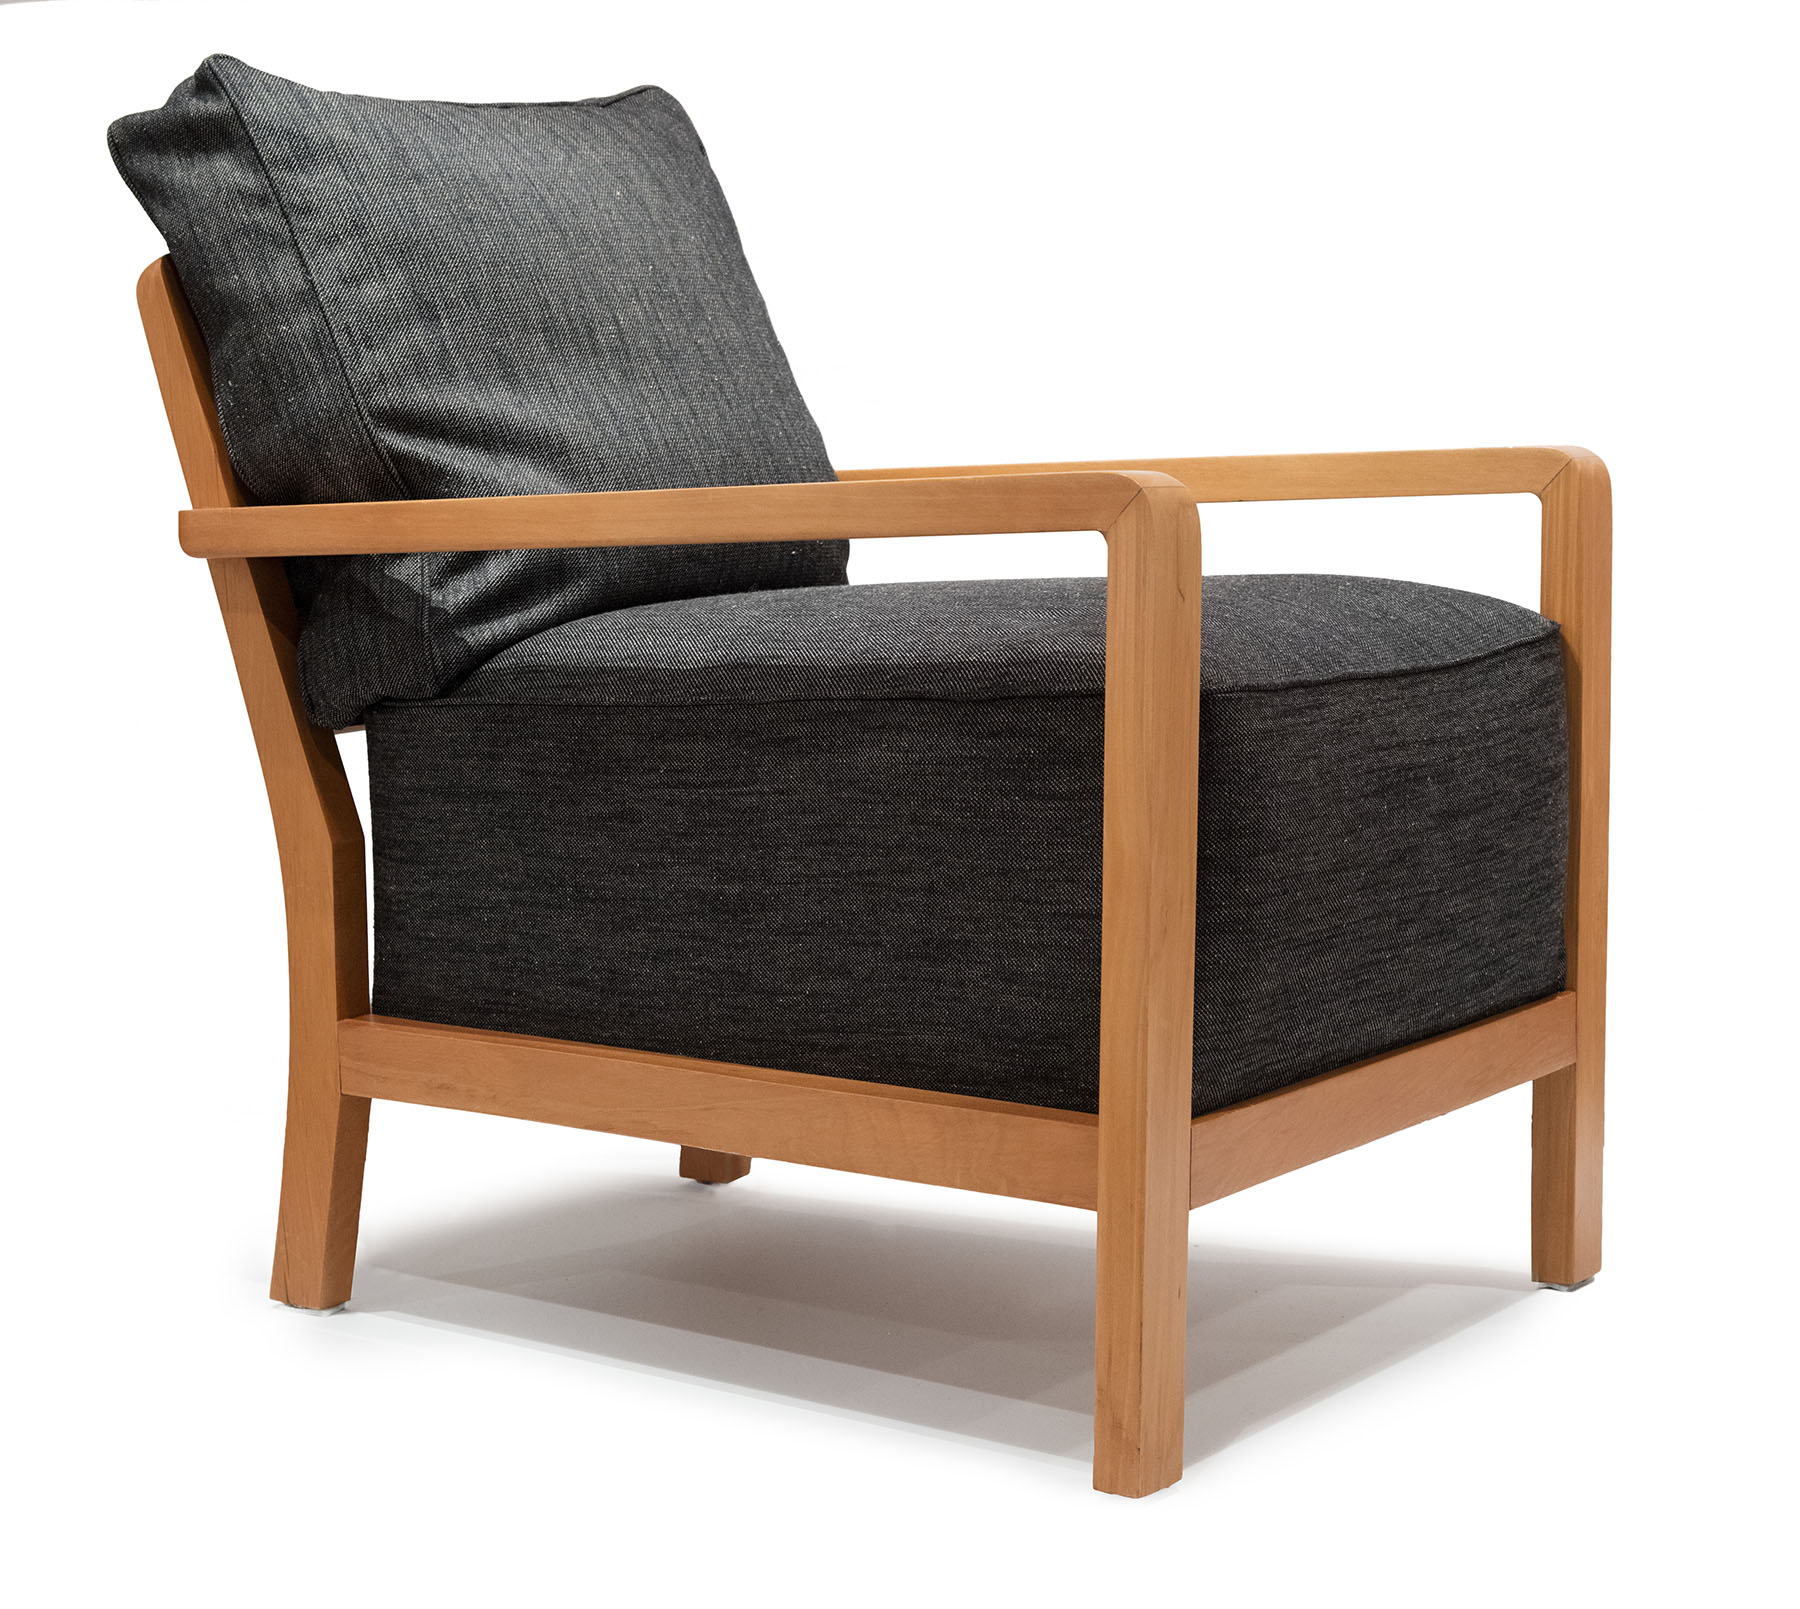 Wooden chair with think black seat cushions